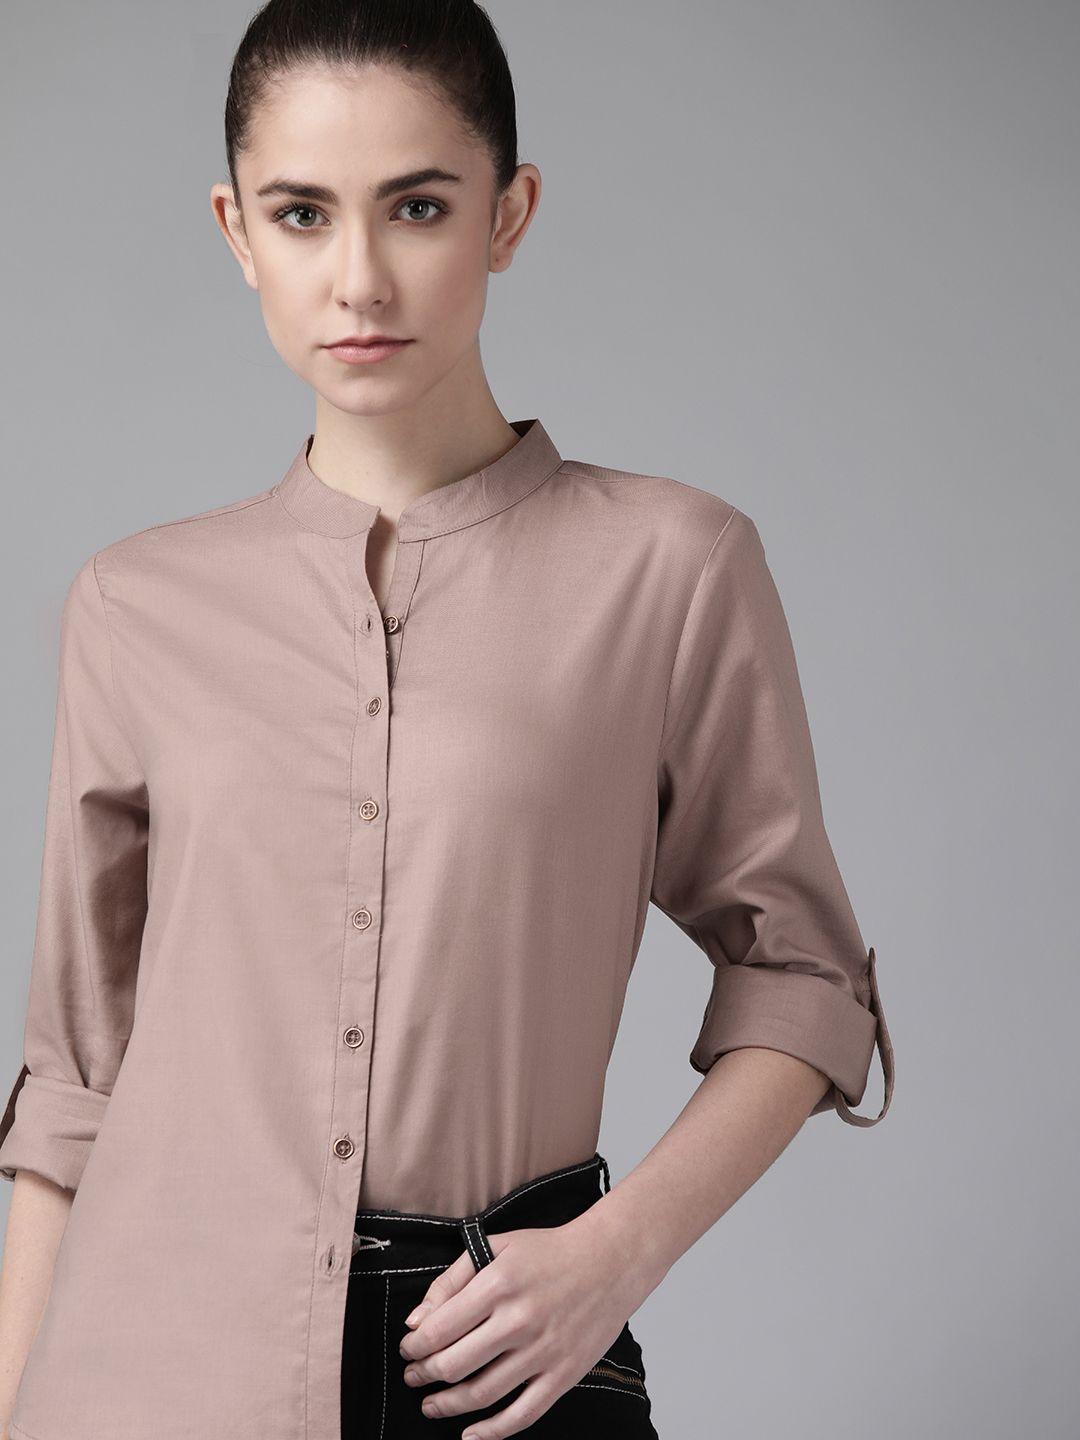 the roadster lifestyle co women mauve pure cotton solid casual shirt